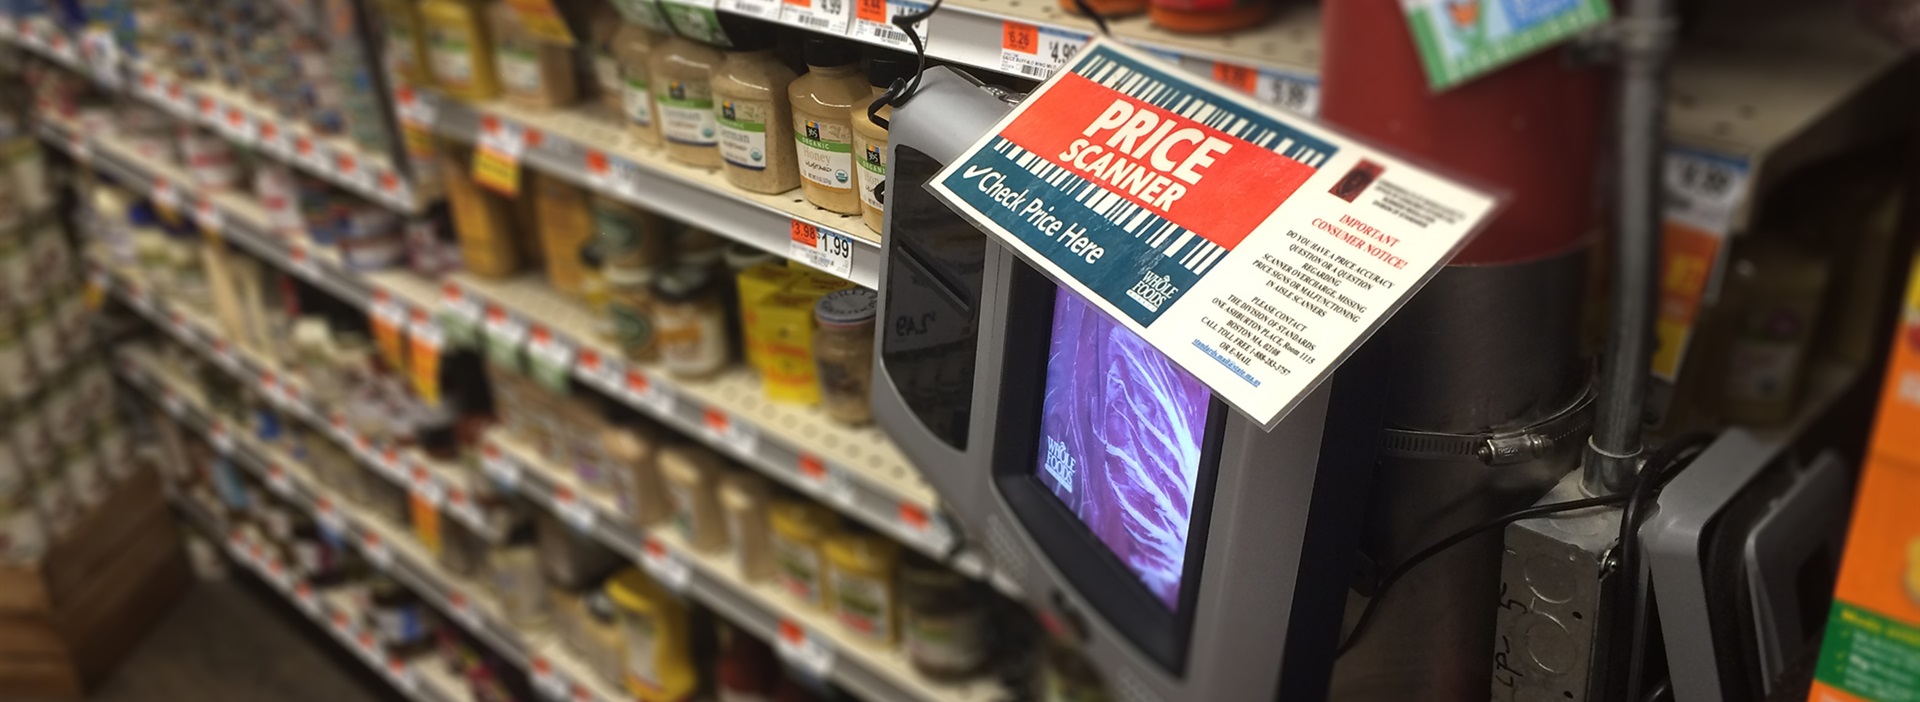 A price scanner in a store